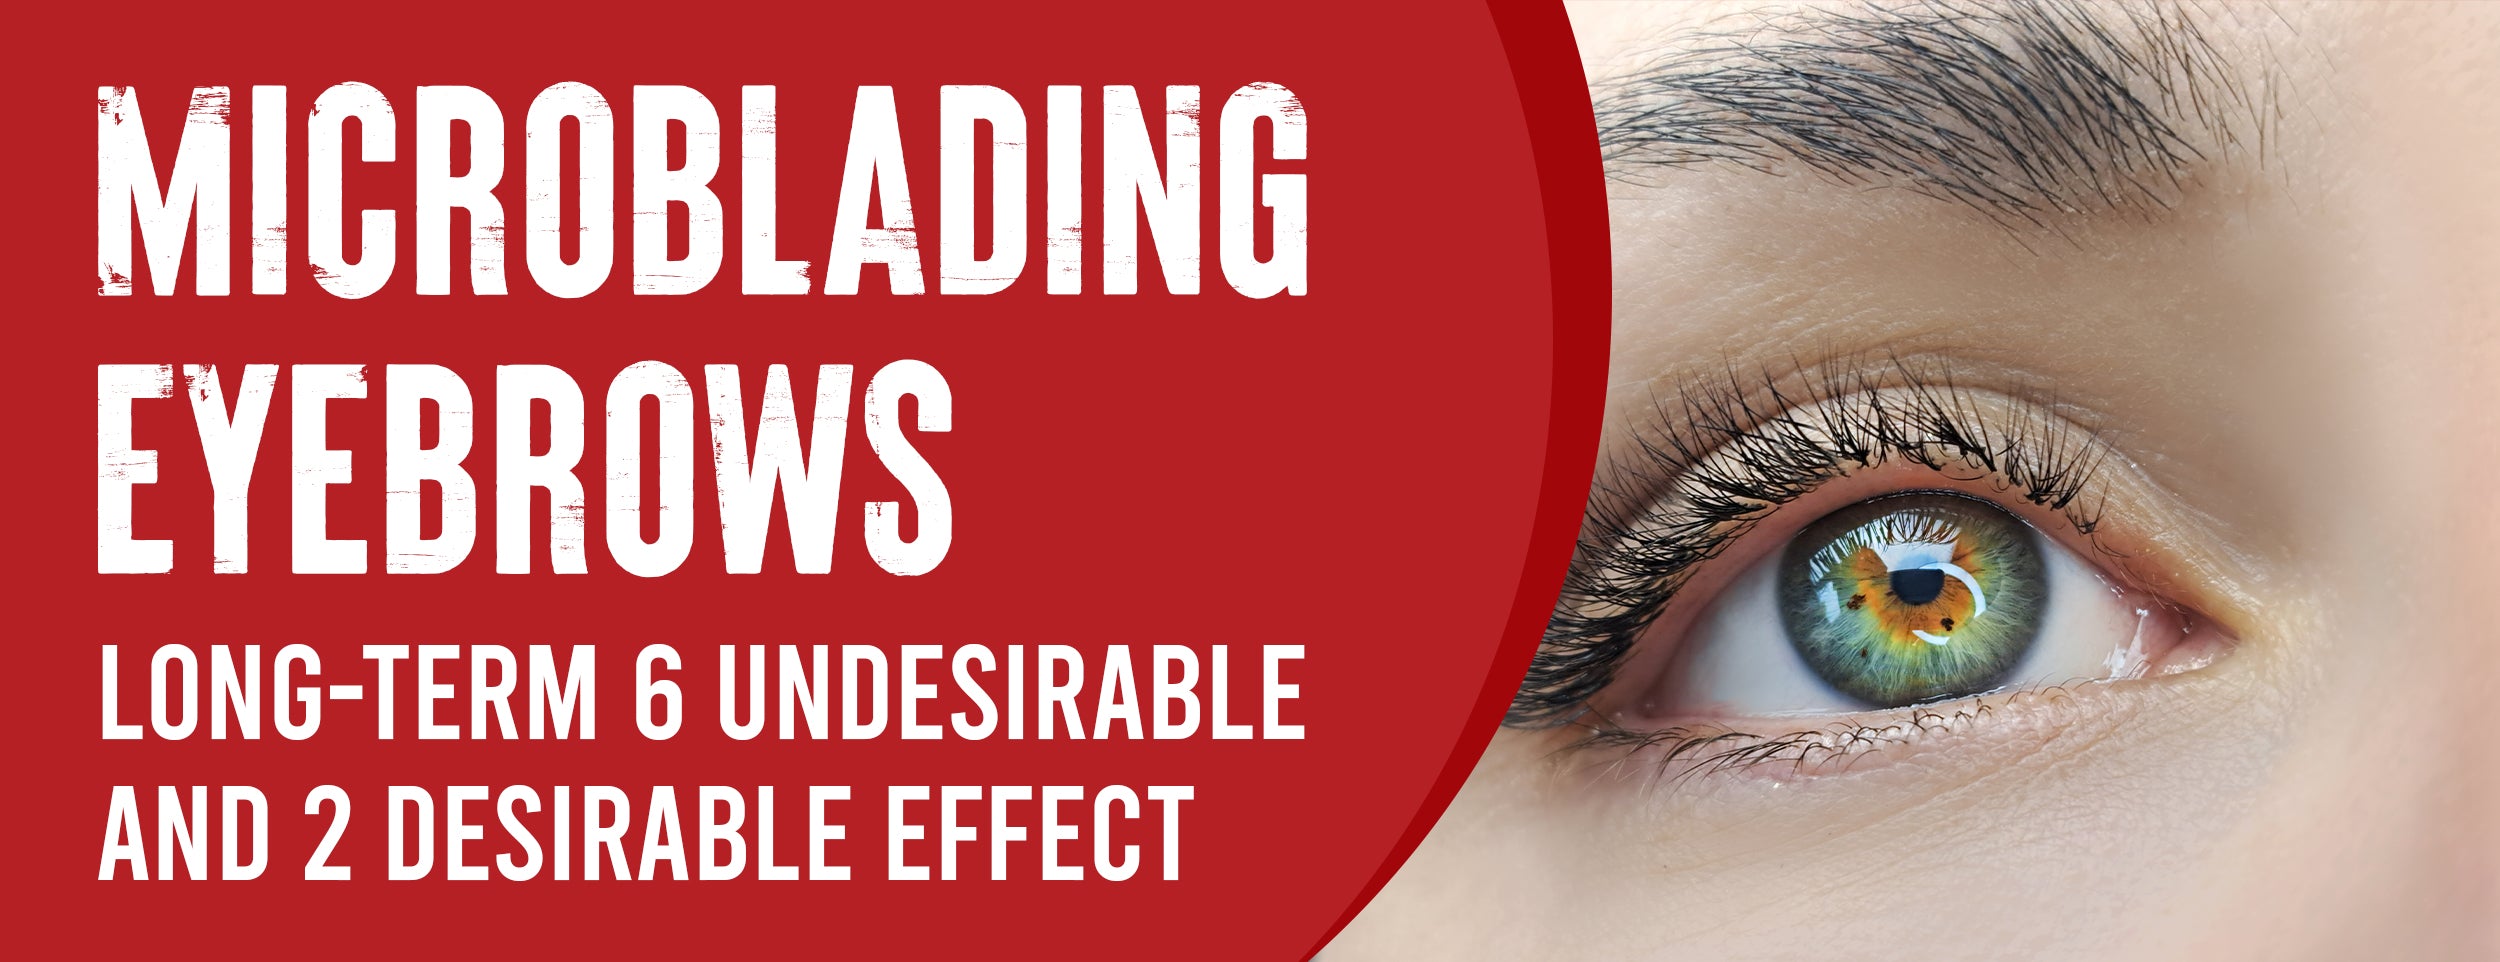 Undesirable and desirable long-term effects of microblading eyebrows